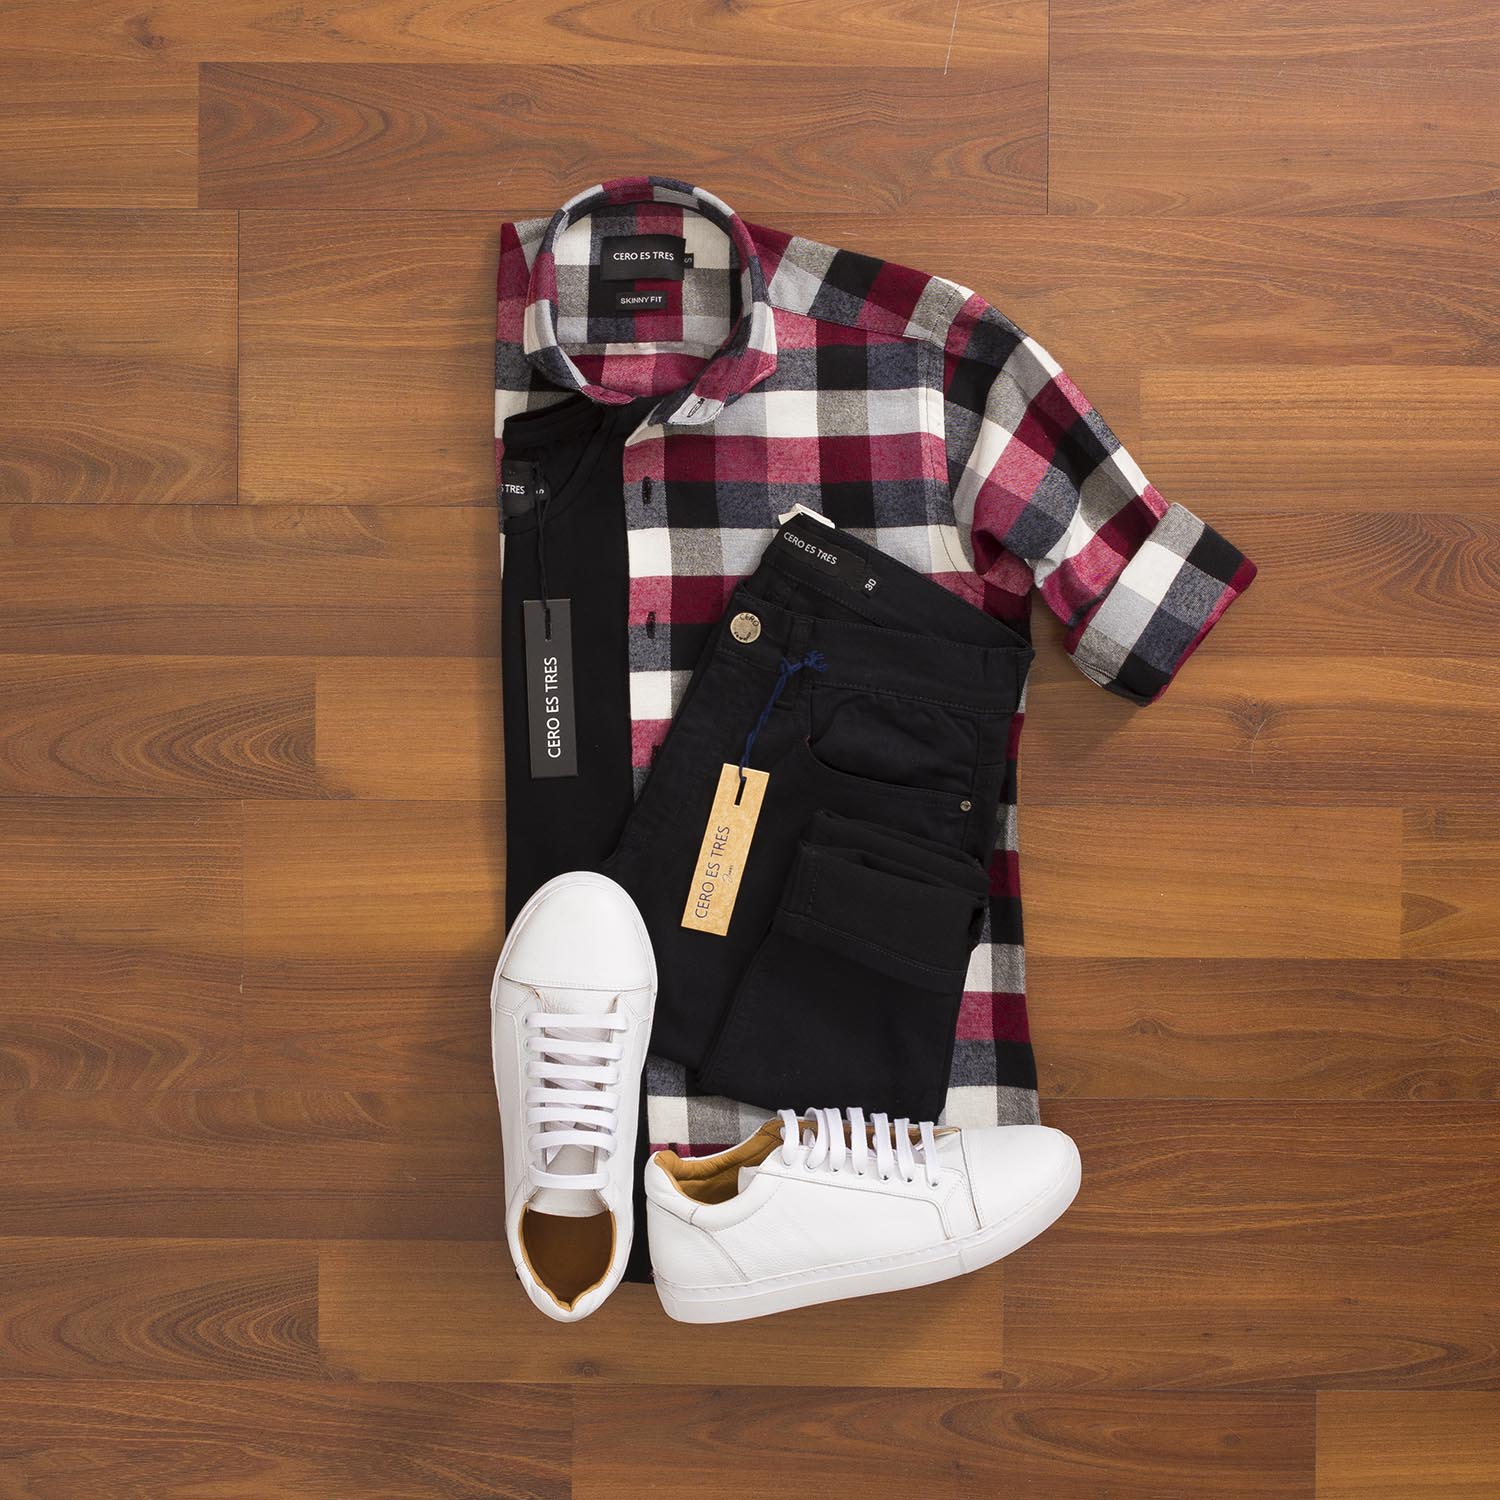 OUTFIT CERO 326